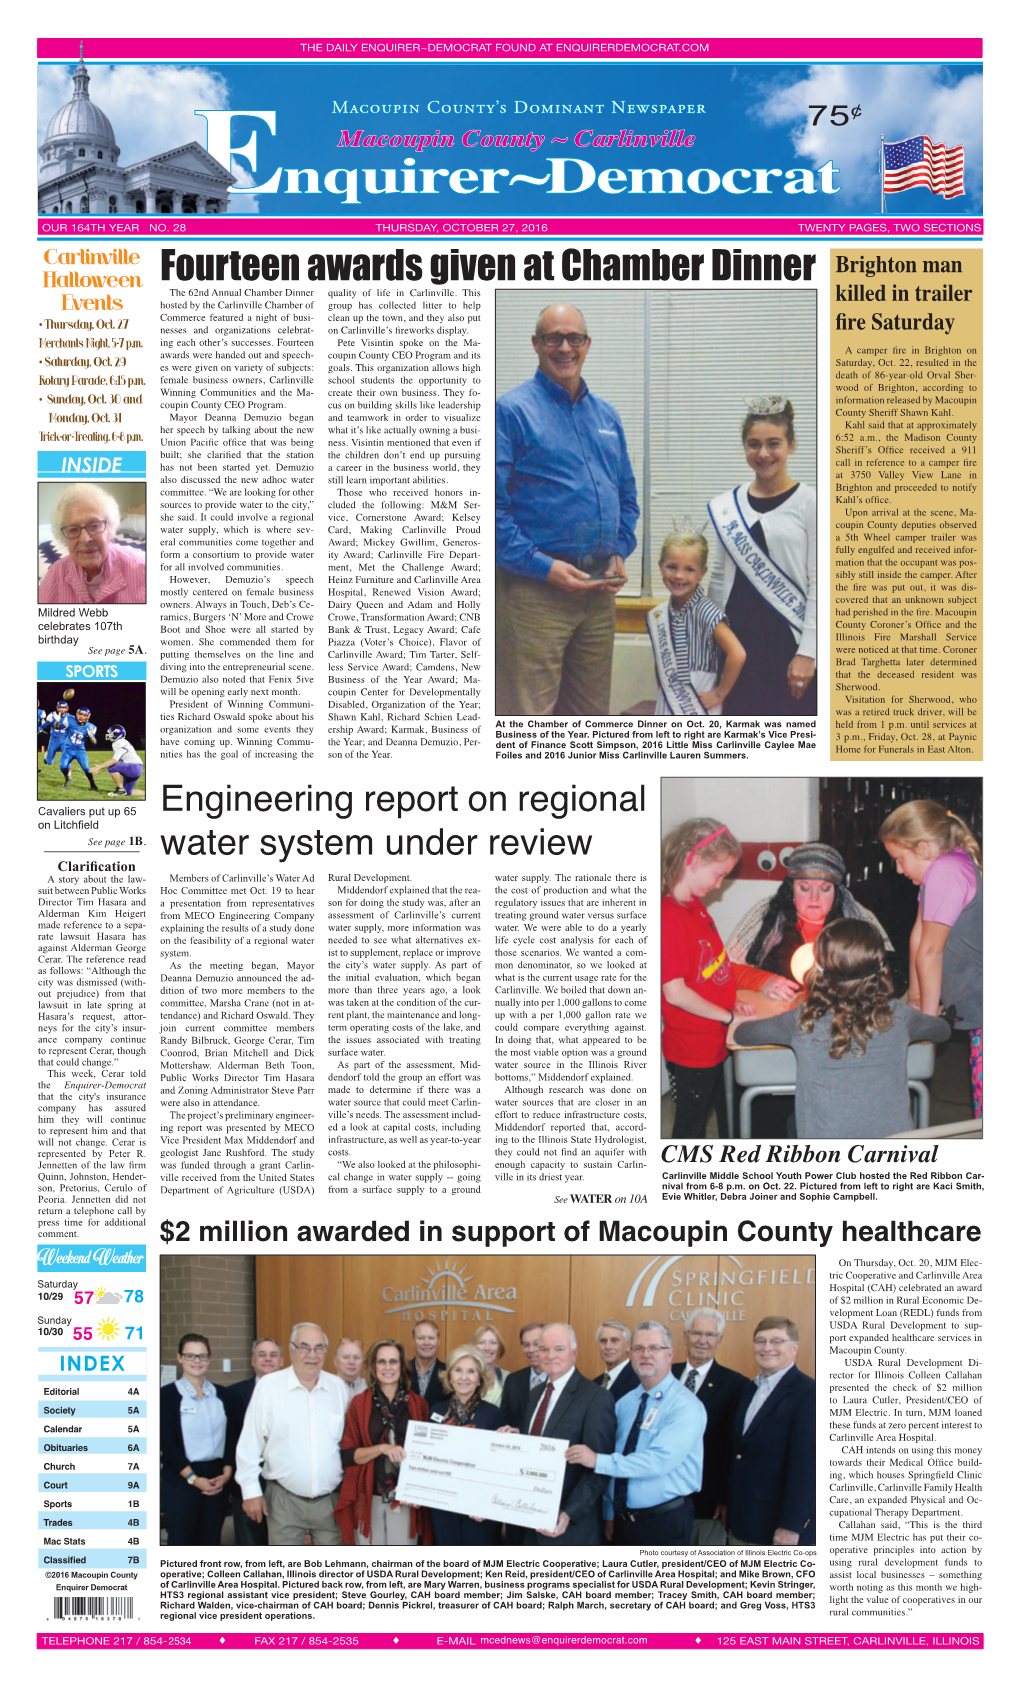 Macoupin County's Dominant Newspaper